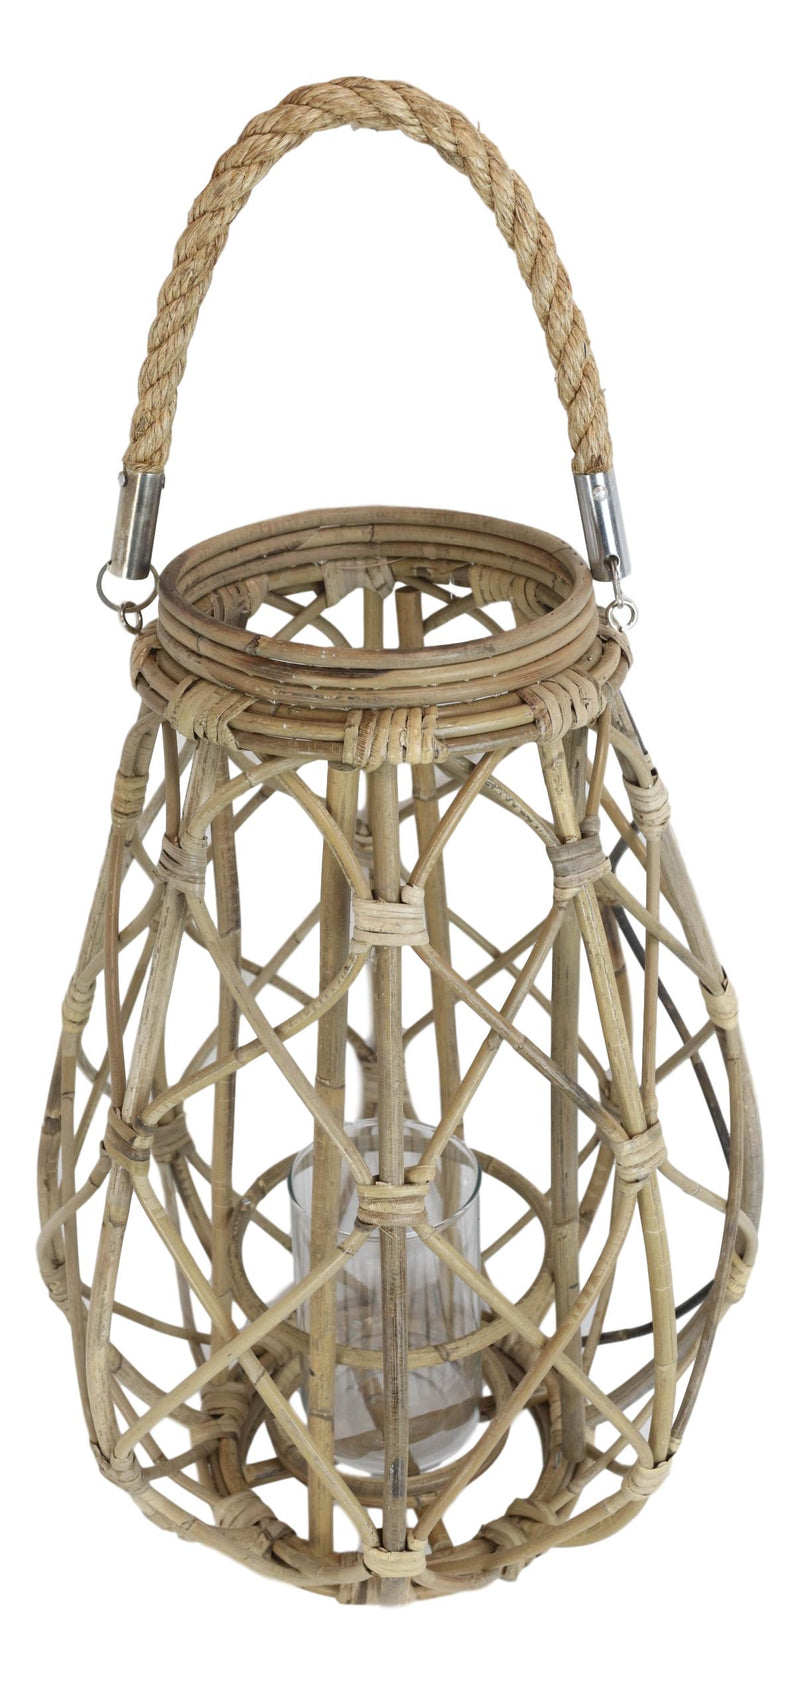 19"H Rustic Farmhouse Teardrop Woven Rattan Candle Lantern With Jute Rope Handle